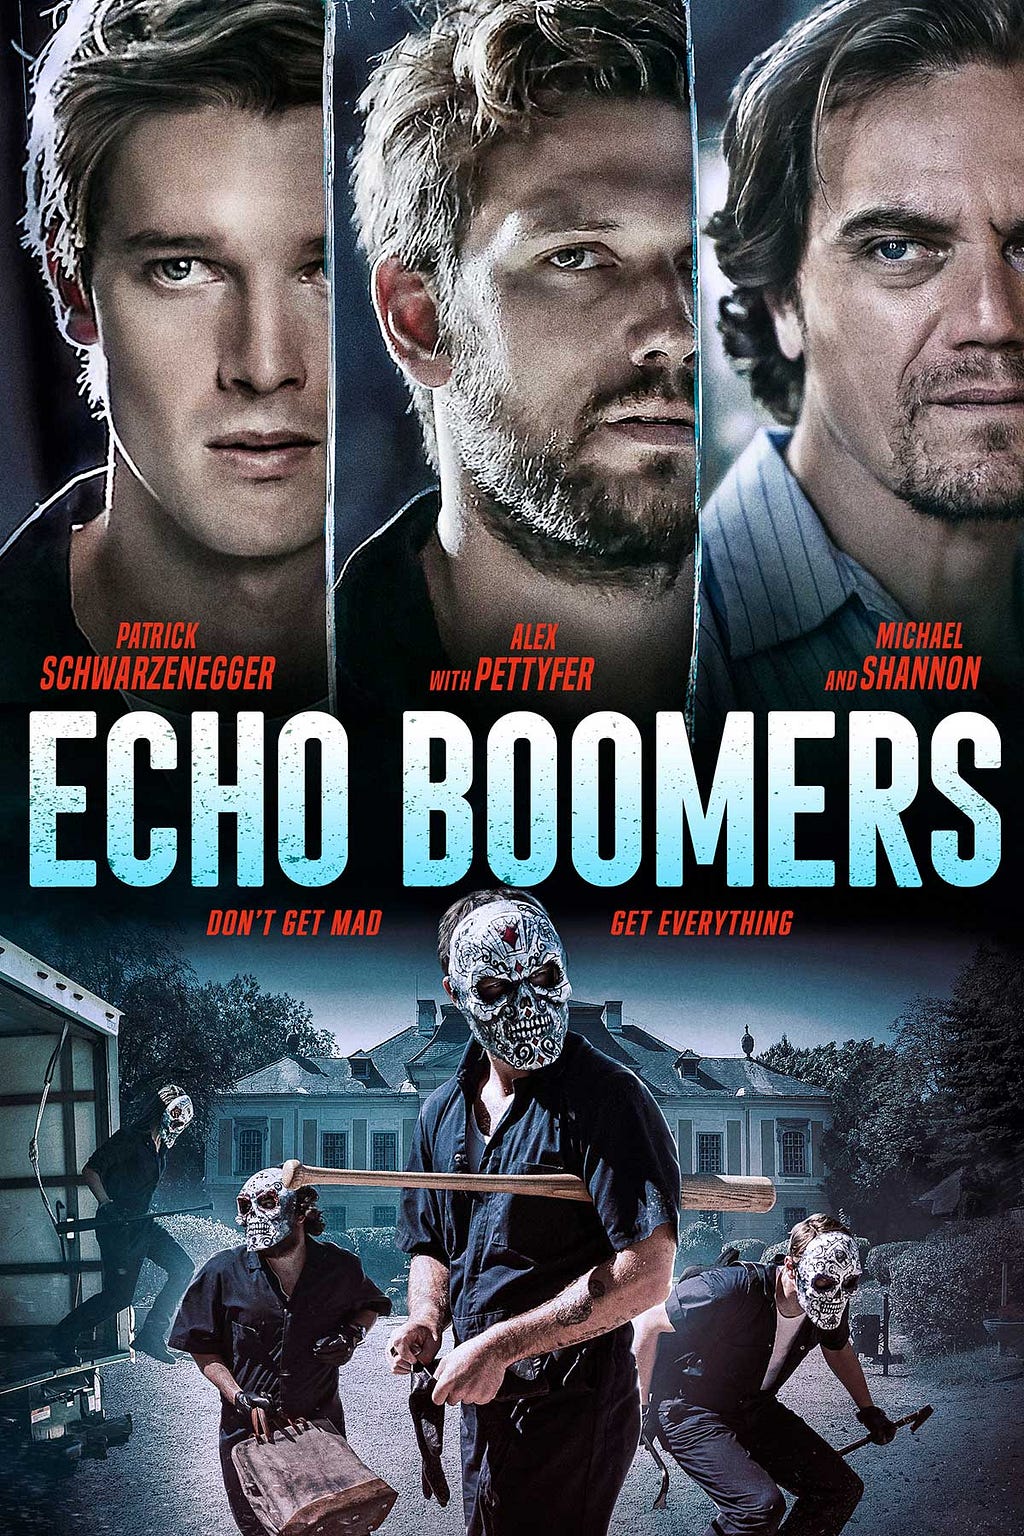 Seth Savoy talks about making the crime thriller ECHO BOOMERS